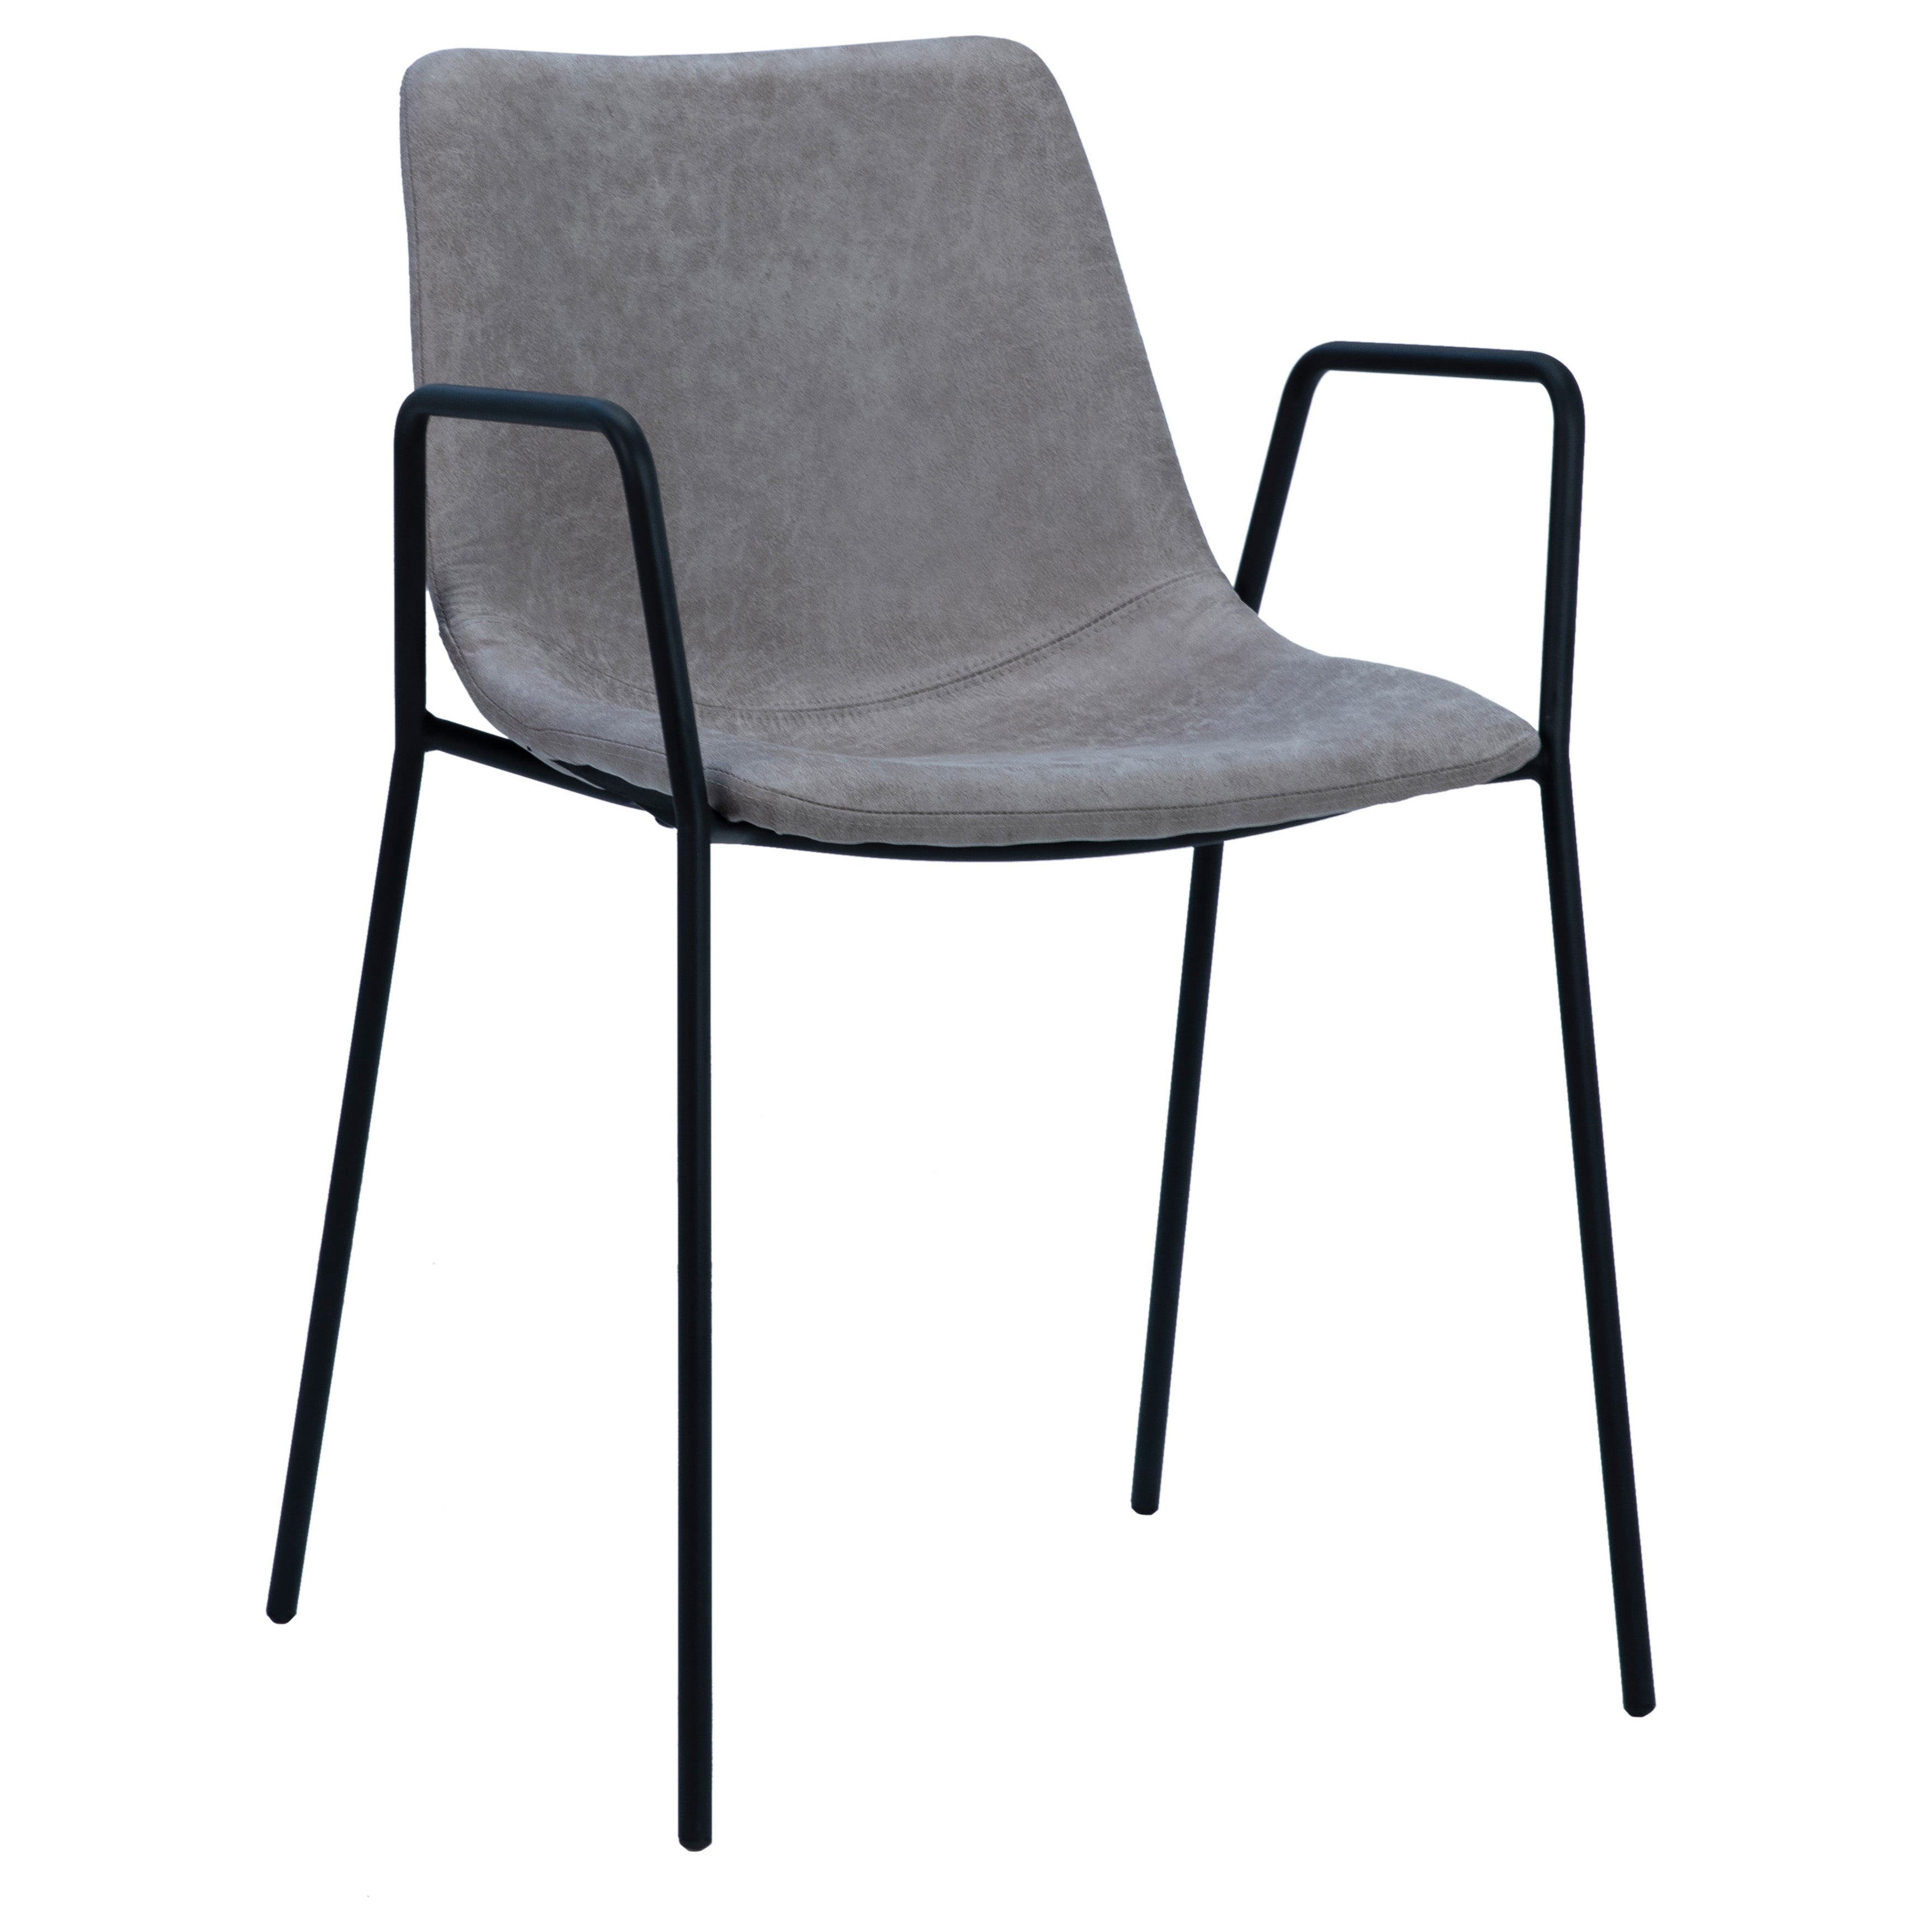 Simple yet striking, this dining chair is ideal for your contemporary dining area. Featuring PU leather seating in a light grey color and a sleek black metal frame. This dining chair is the ultimate seating option for your modern space. Amethyst Home provides interior design, new home construction design consulting, vintage area rugs, and lighting in the Nashville metro area.